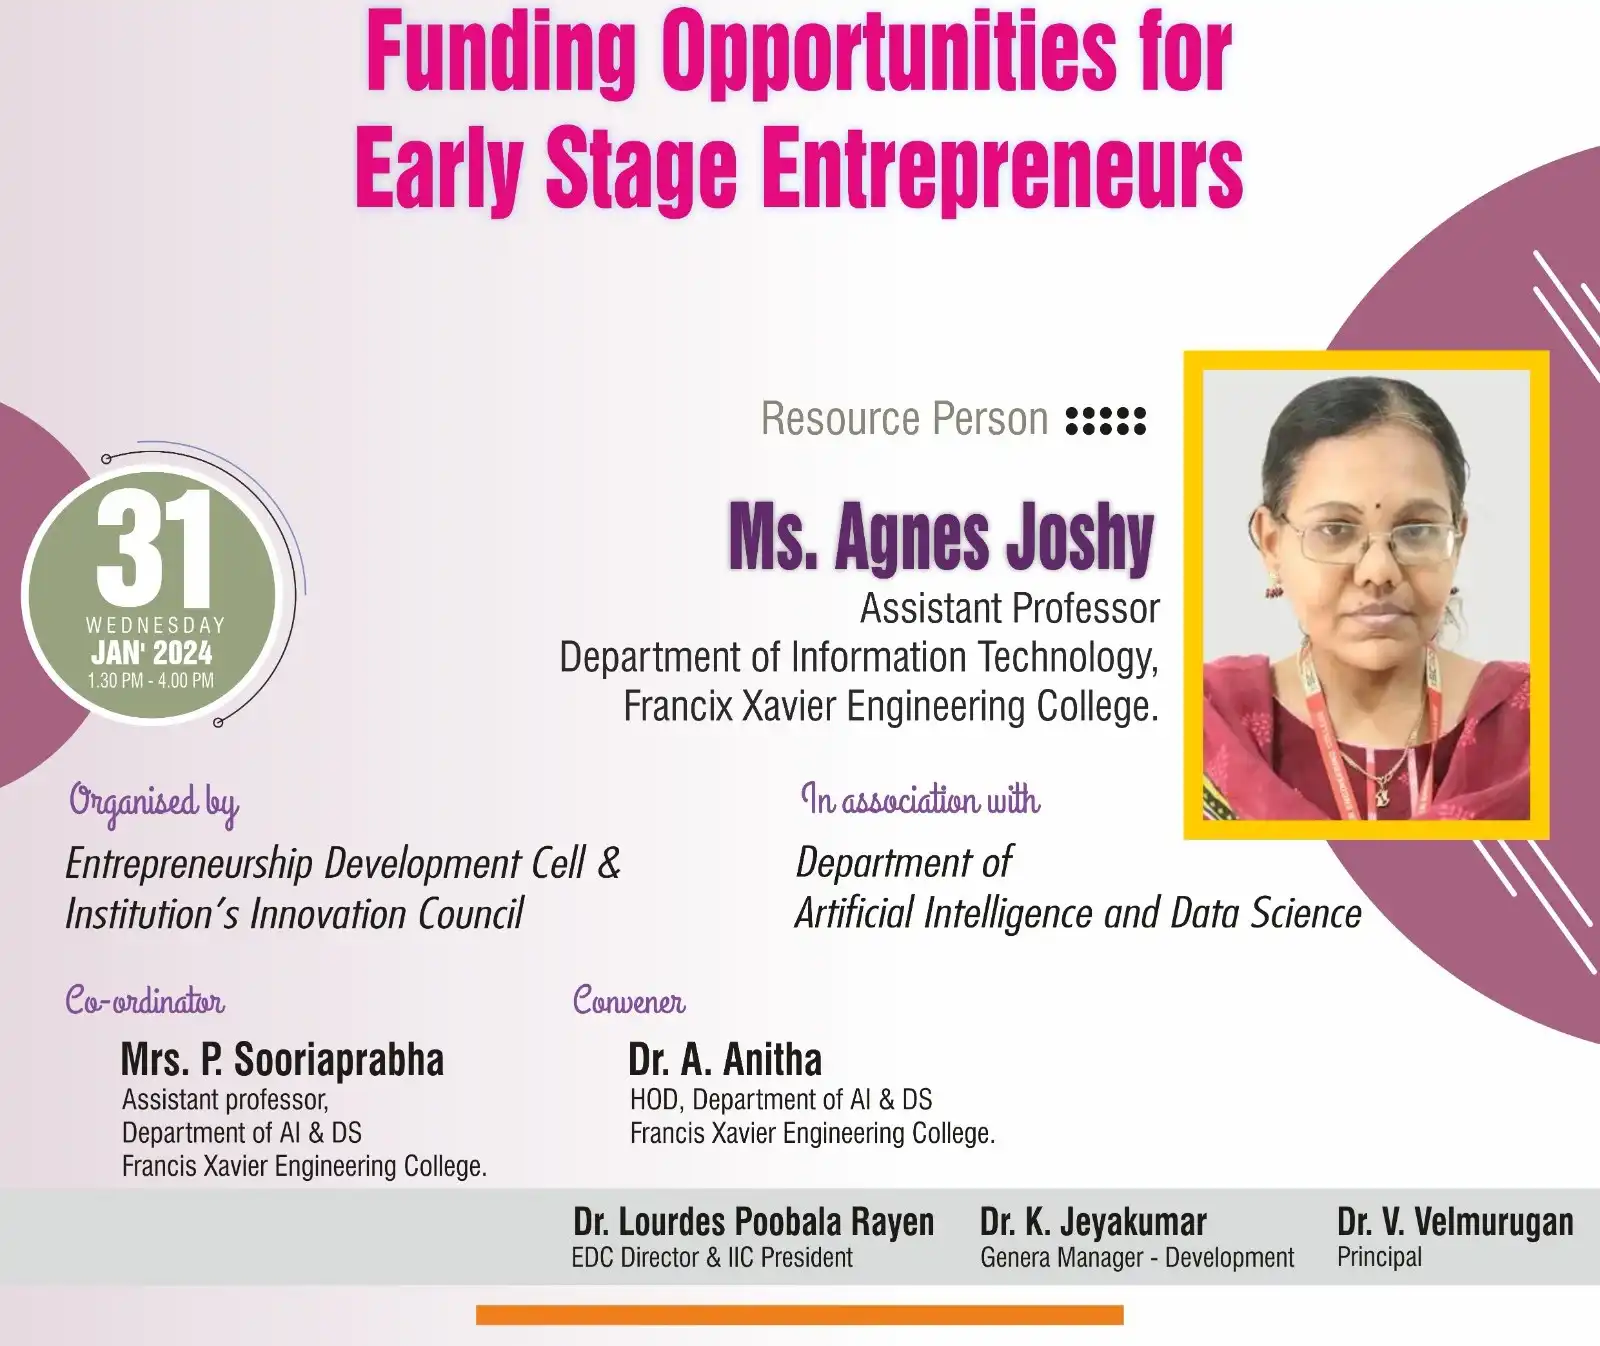 Funding Opportunities for Early Stage Entrepreneurs